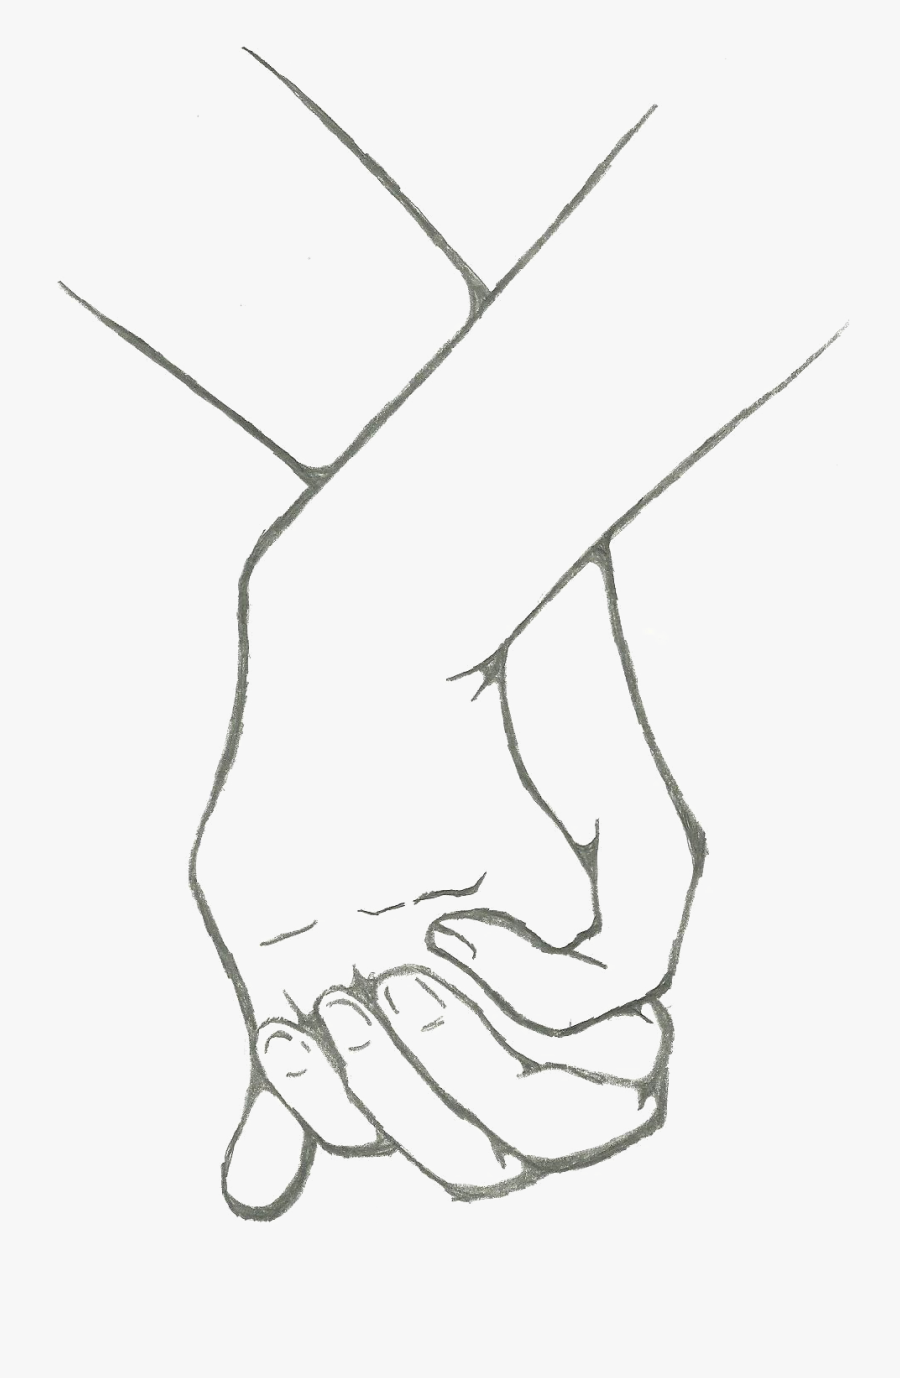 Holding Hands Png Anime Couple Base Drawing Free Transparent Clipart Clipartkey Anime hands holding different objects. holding hands png anime couple base